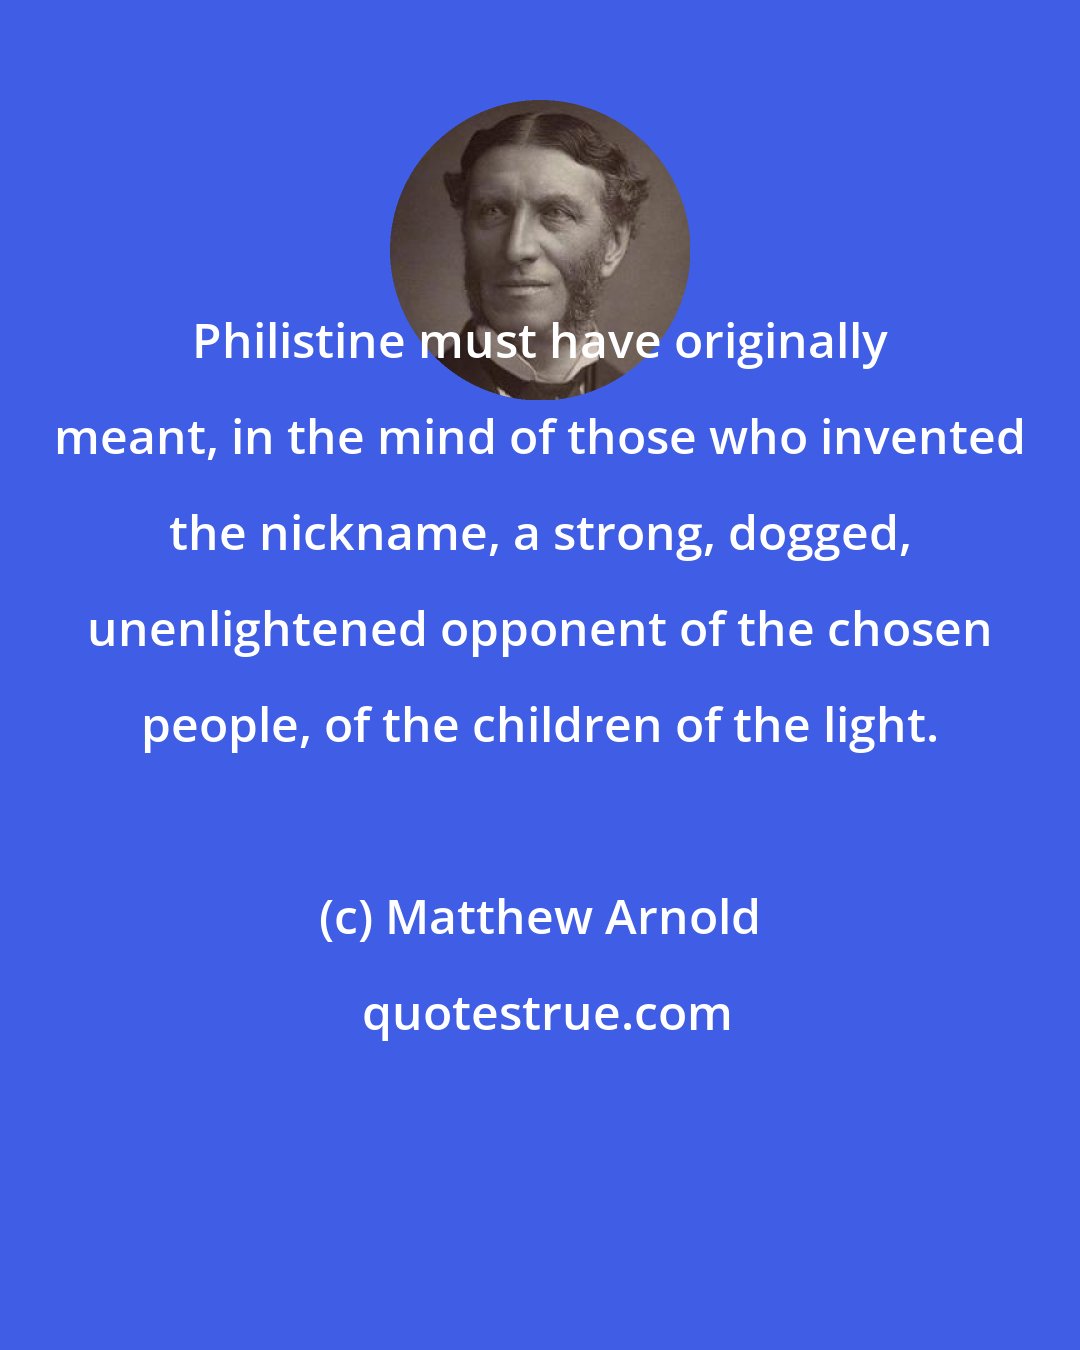 Matthew Arnold: Philistine must have originally meant, in the mind of those who invented the nickname, a strong, dogged, unenlightened opponent of the chosen people, of the children of the light.